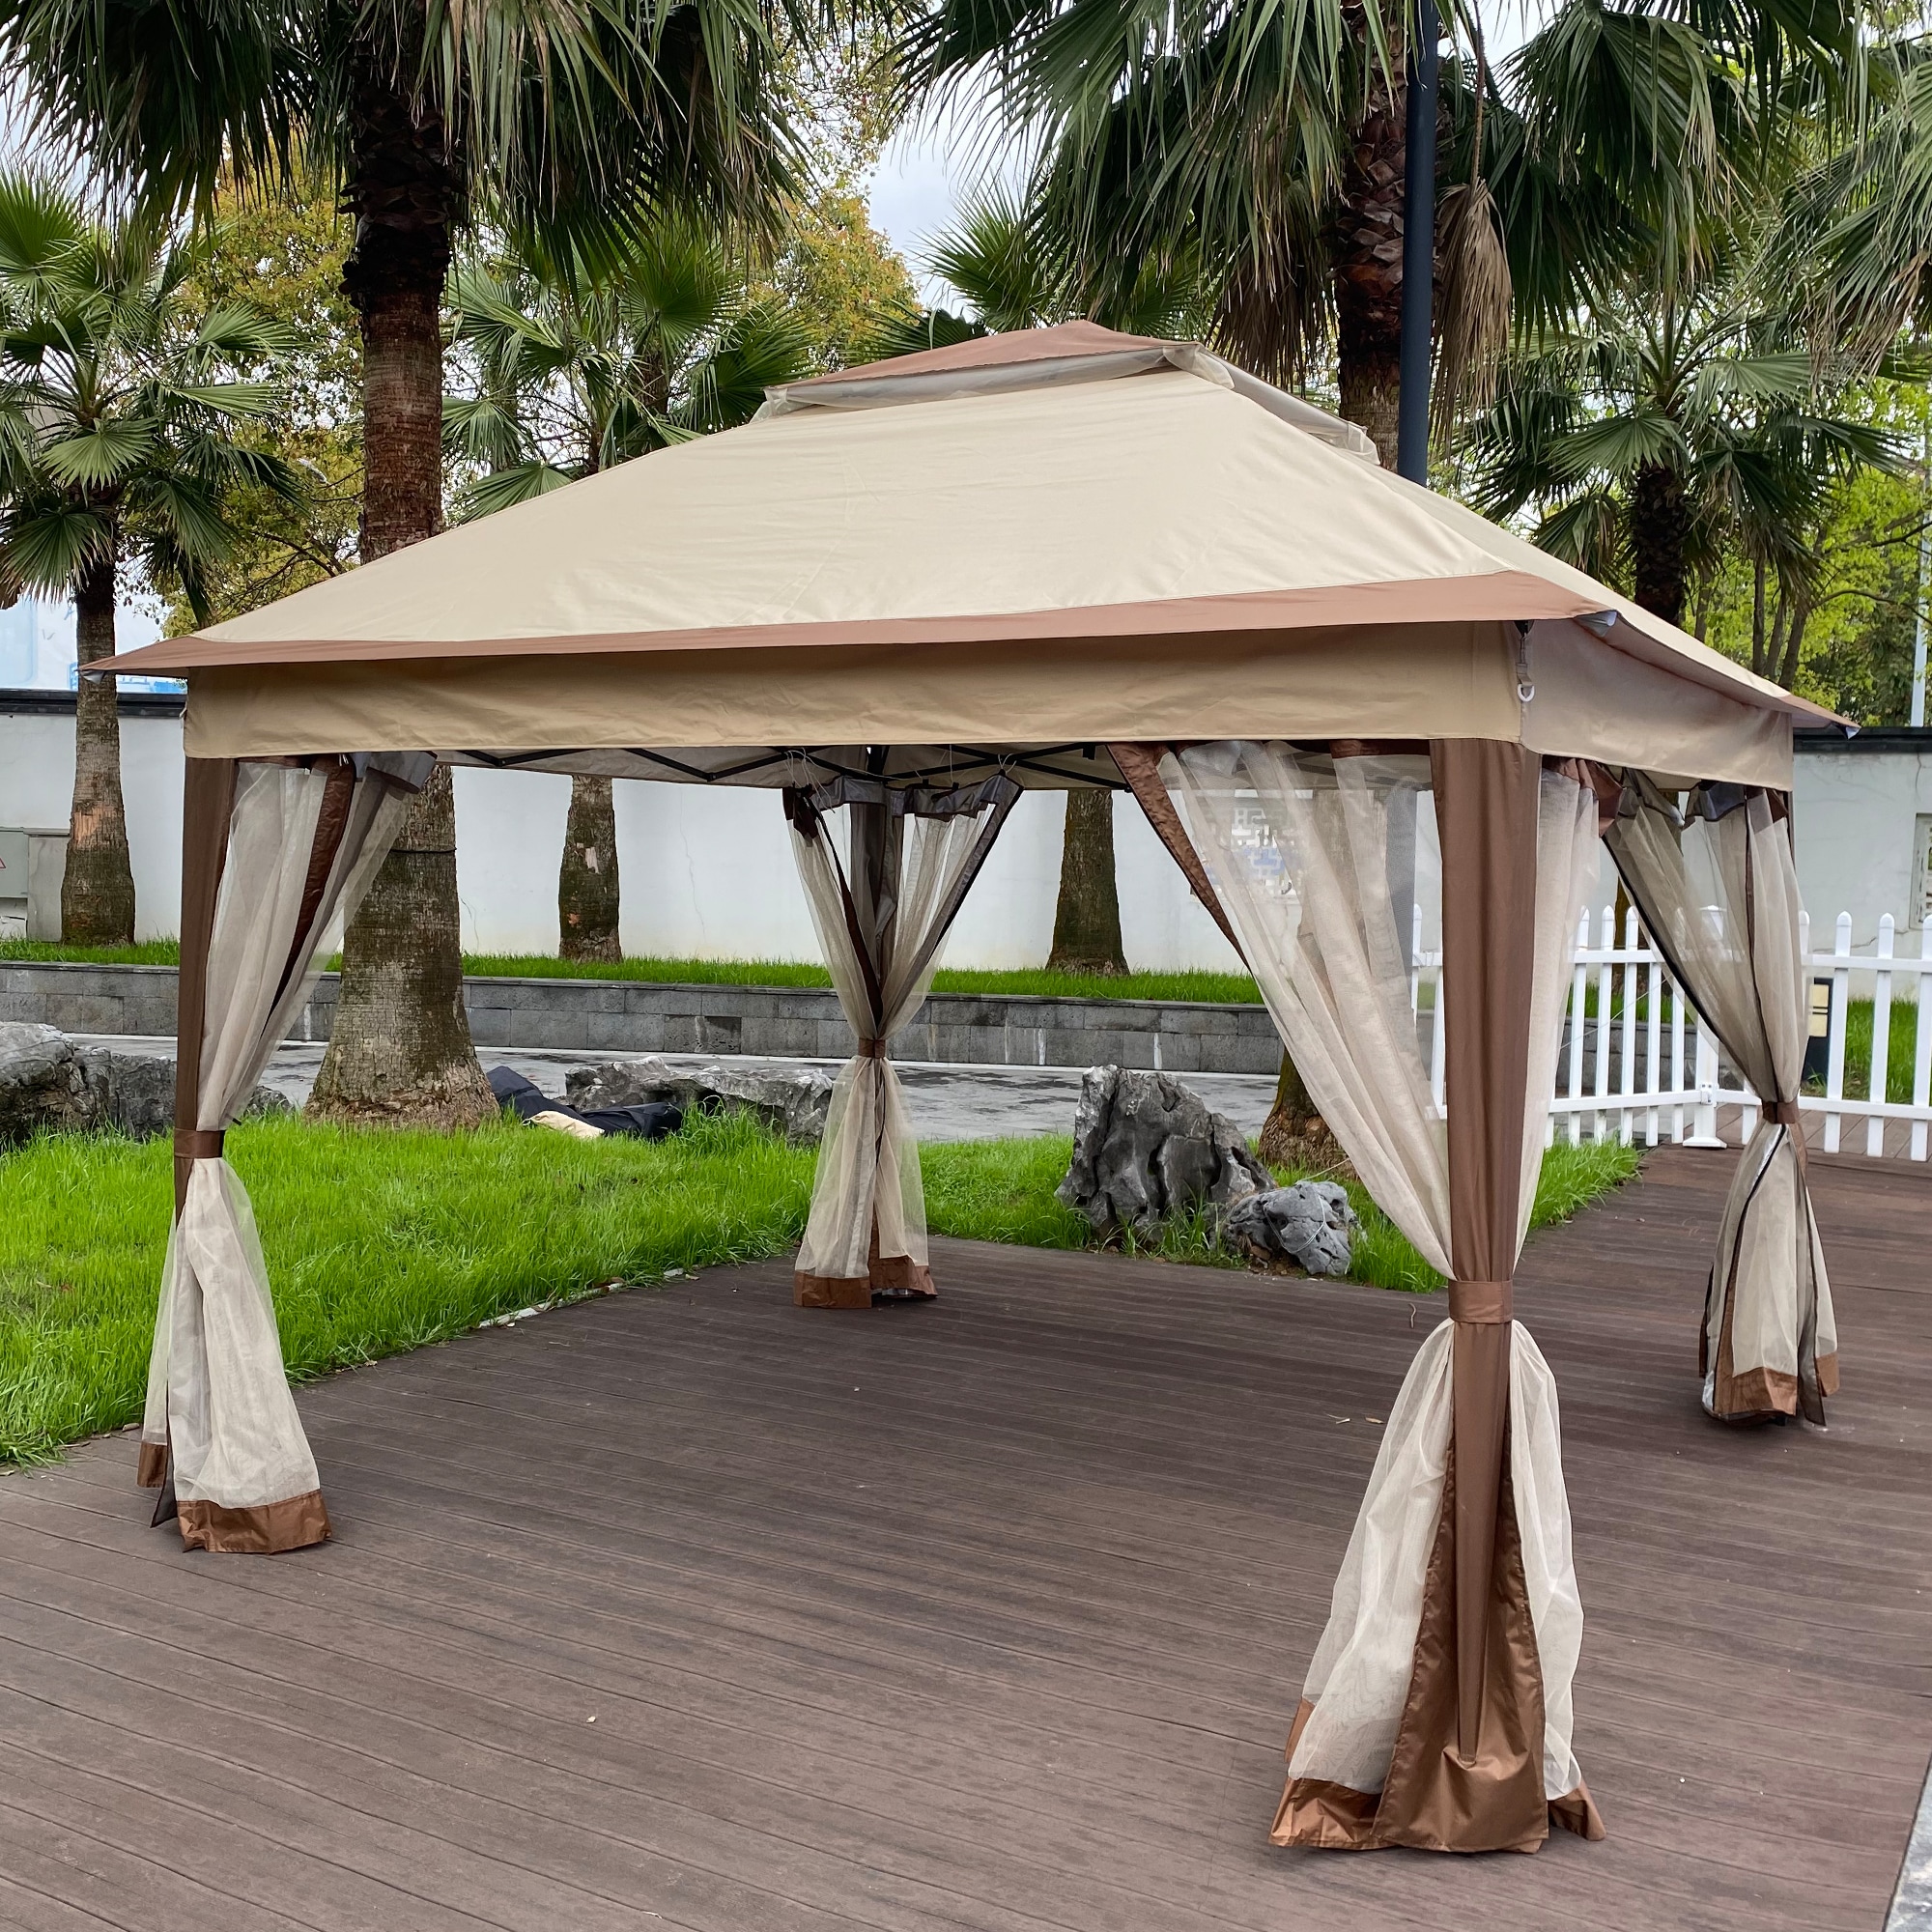 CASAINC 11-ft x 11-ft Brown Pop-up Canopy in the department at Lowes.com